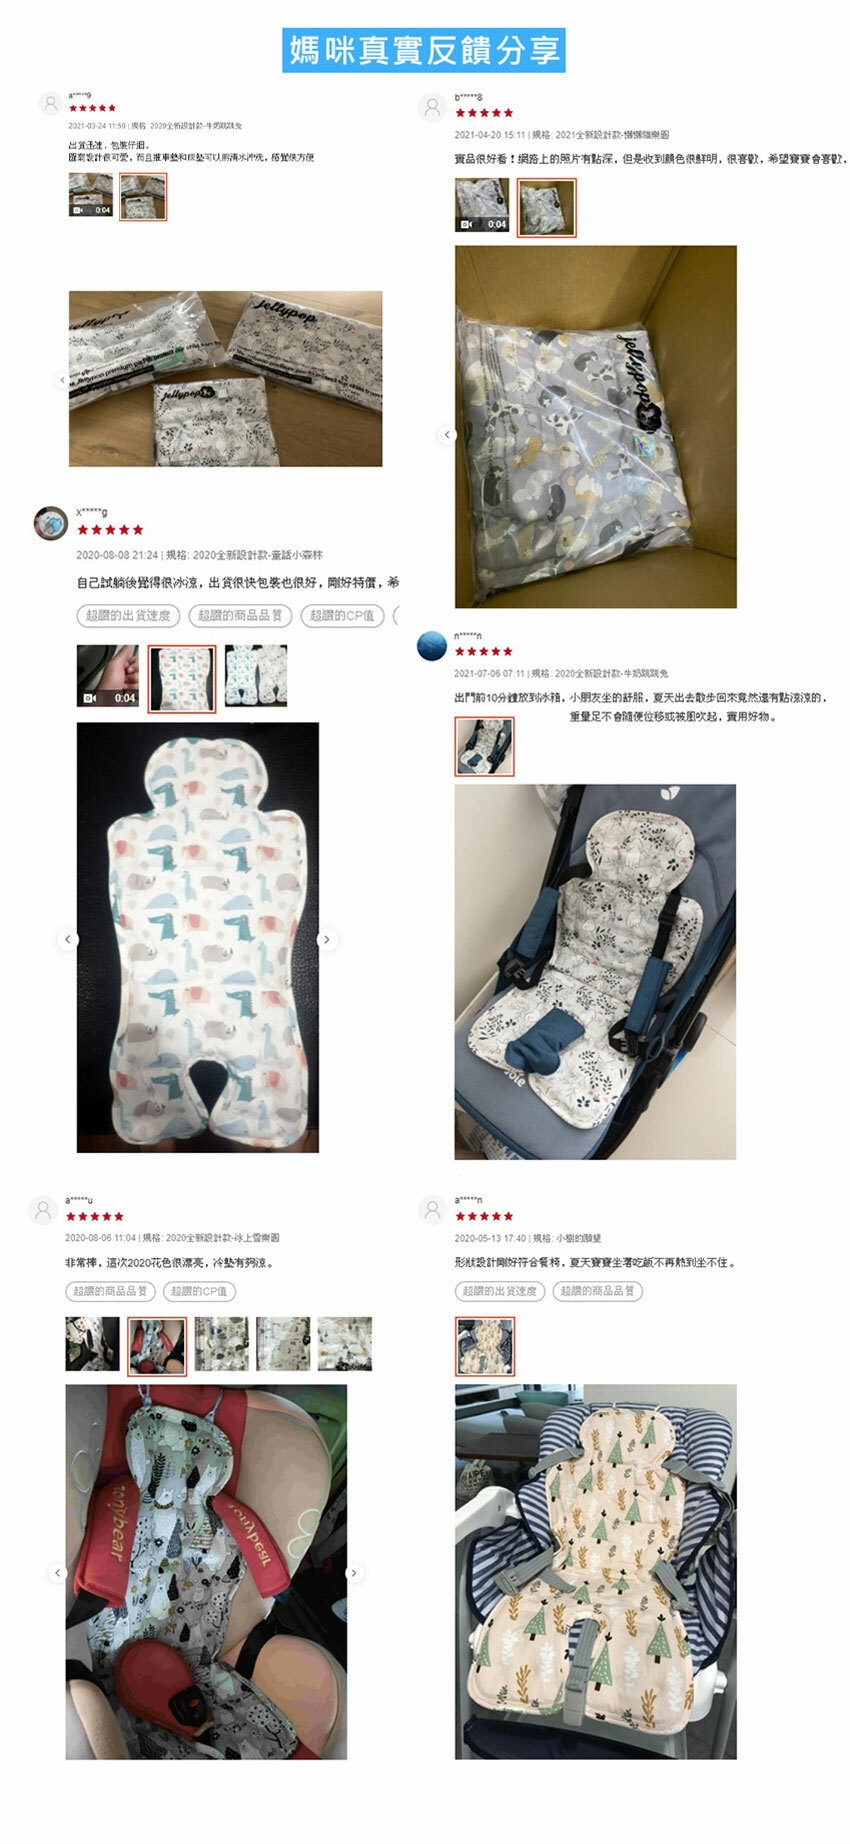 [Korea Jellypop] Jellyseat exclusive ice beads patented long-lasting cooling stroller seat cushion - Dream Lamb